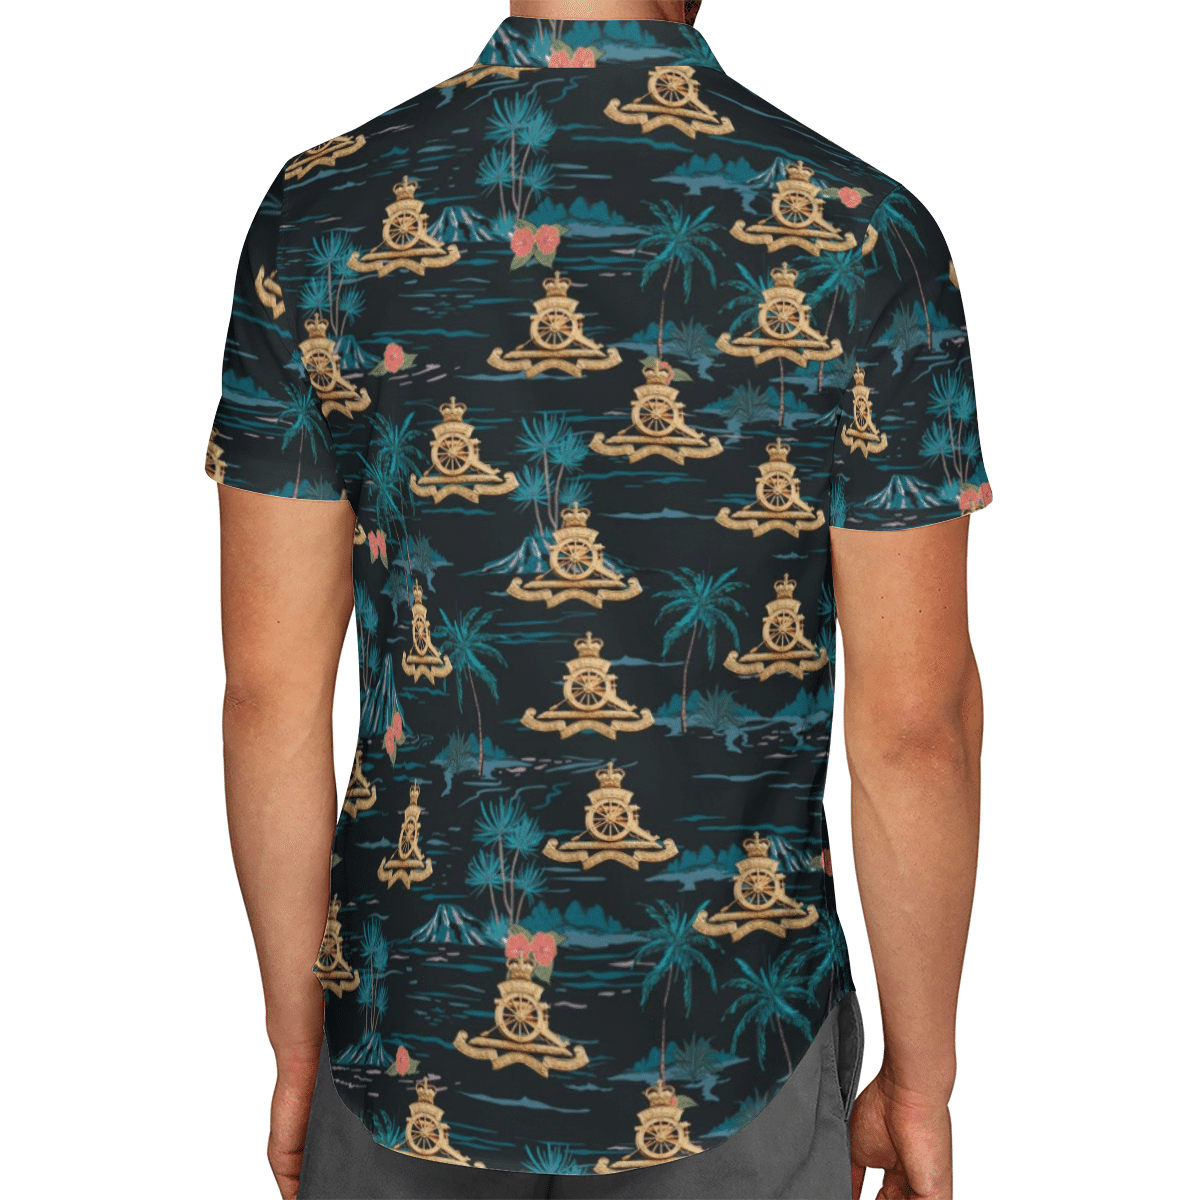 Going to the beach with a quality shirt 173